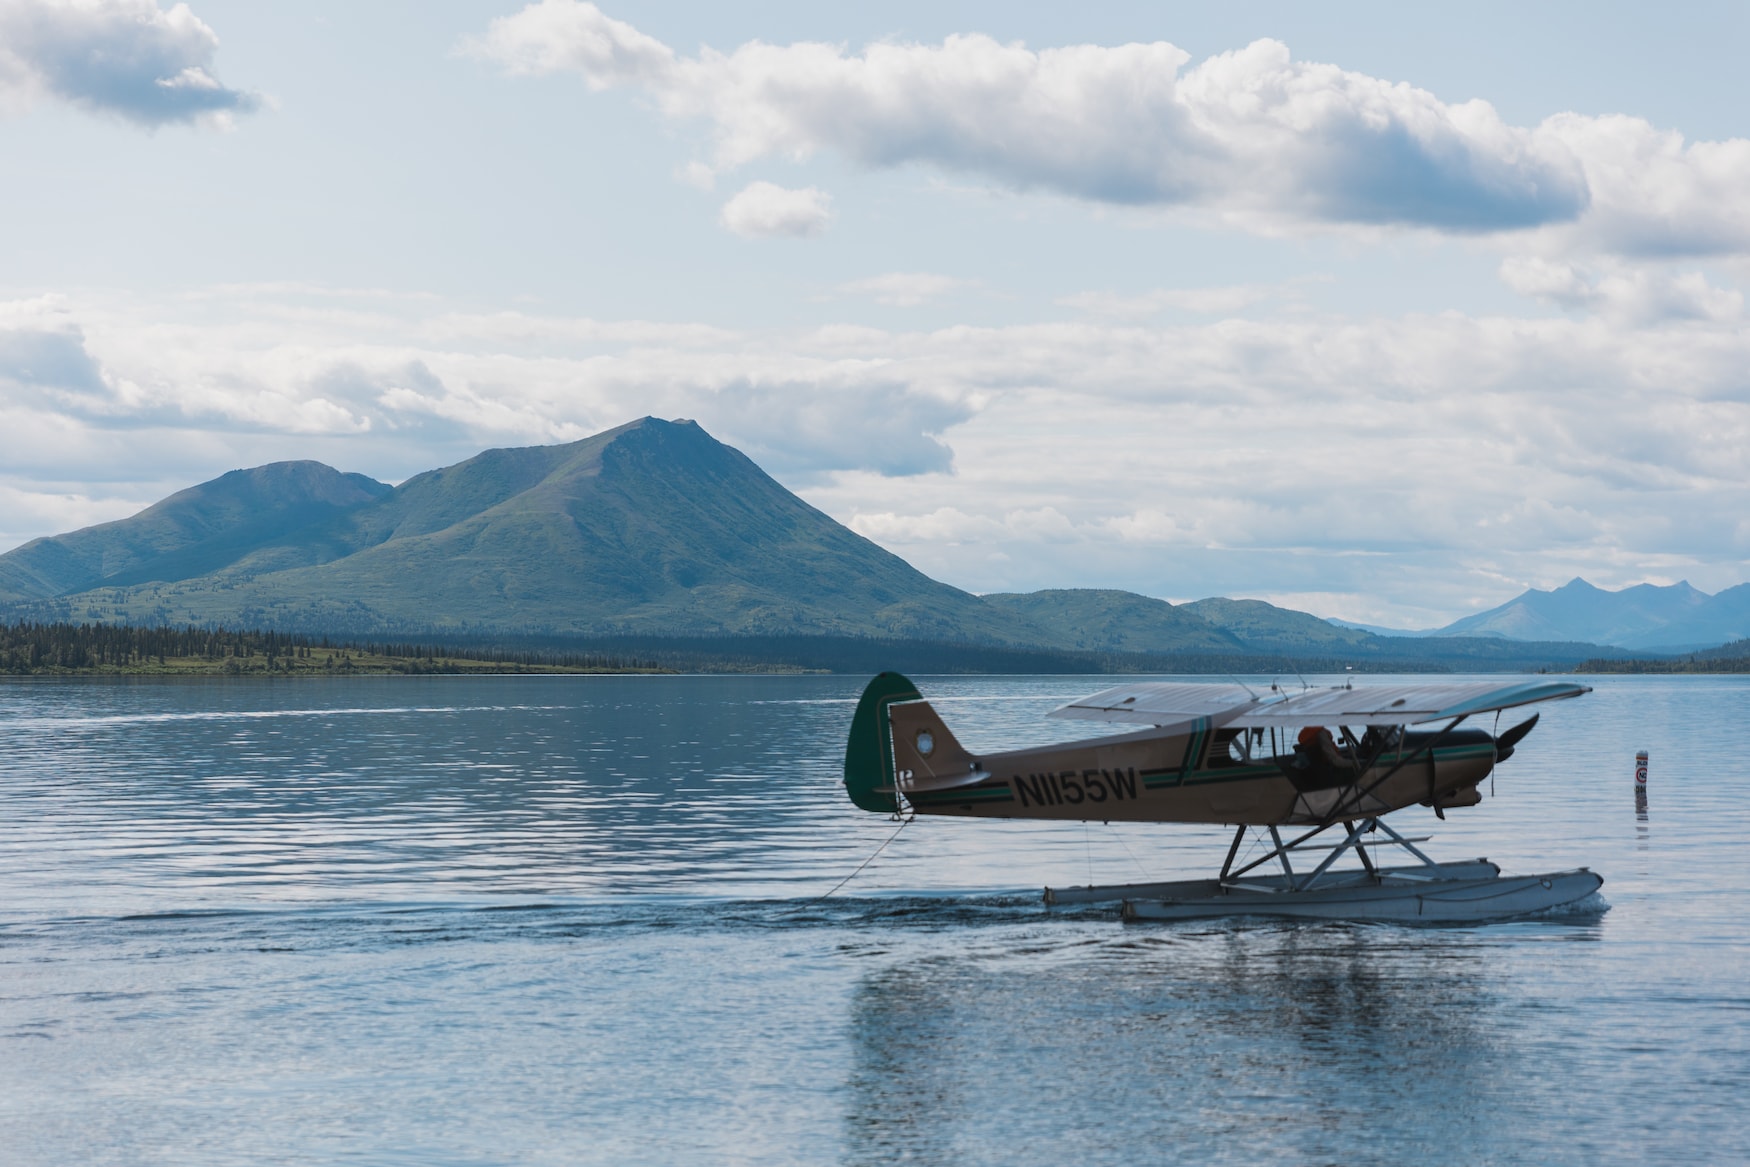 A single-engine seaplane with registration N1155W floats on a tranquil lake with a striking mountain range backdrop and scattered clouds in the sky, evoking a sense of adventure in the wilderness.